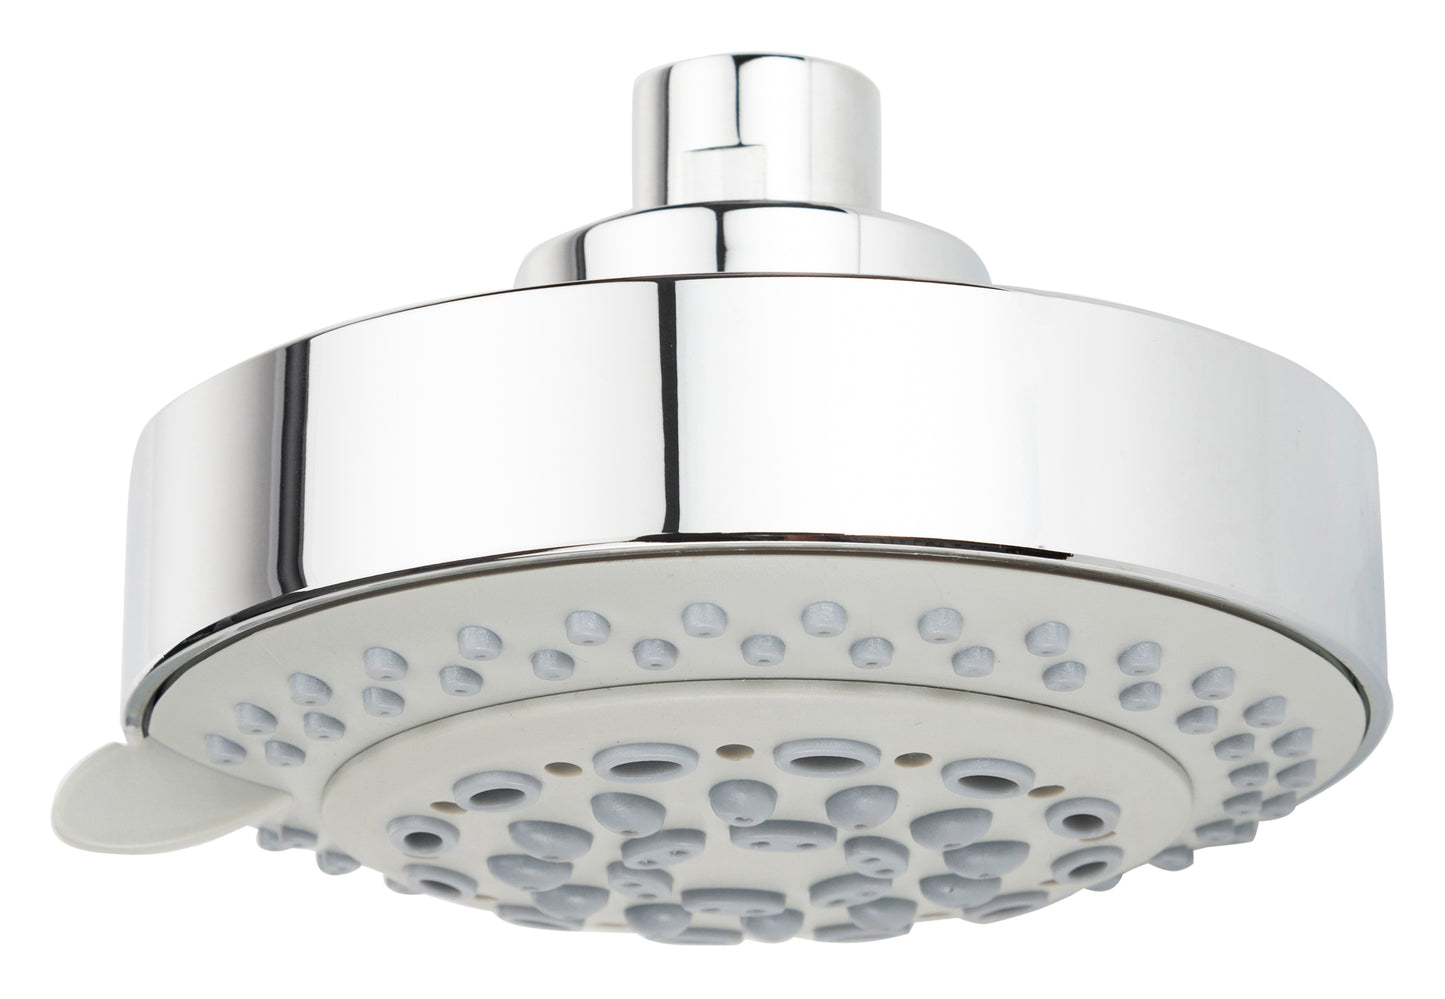 RiverSoft MS02 Mist flow overhead shower with 4 spray settings (Chrome, ABS).